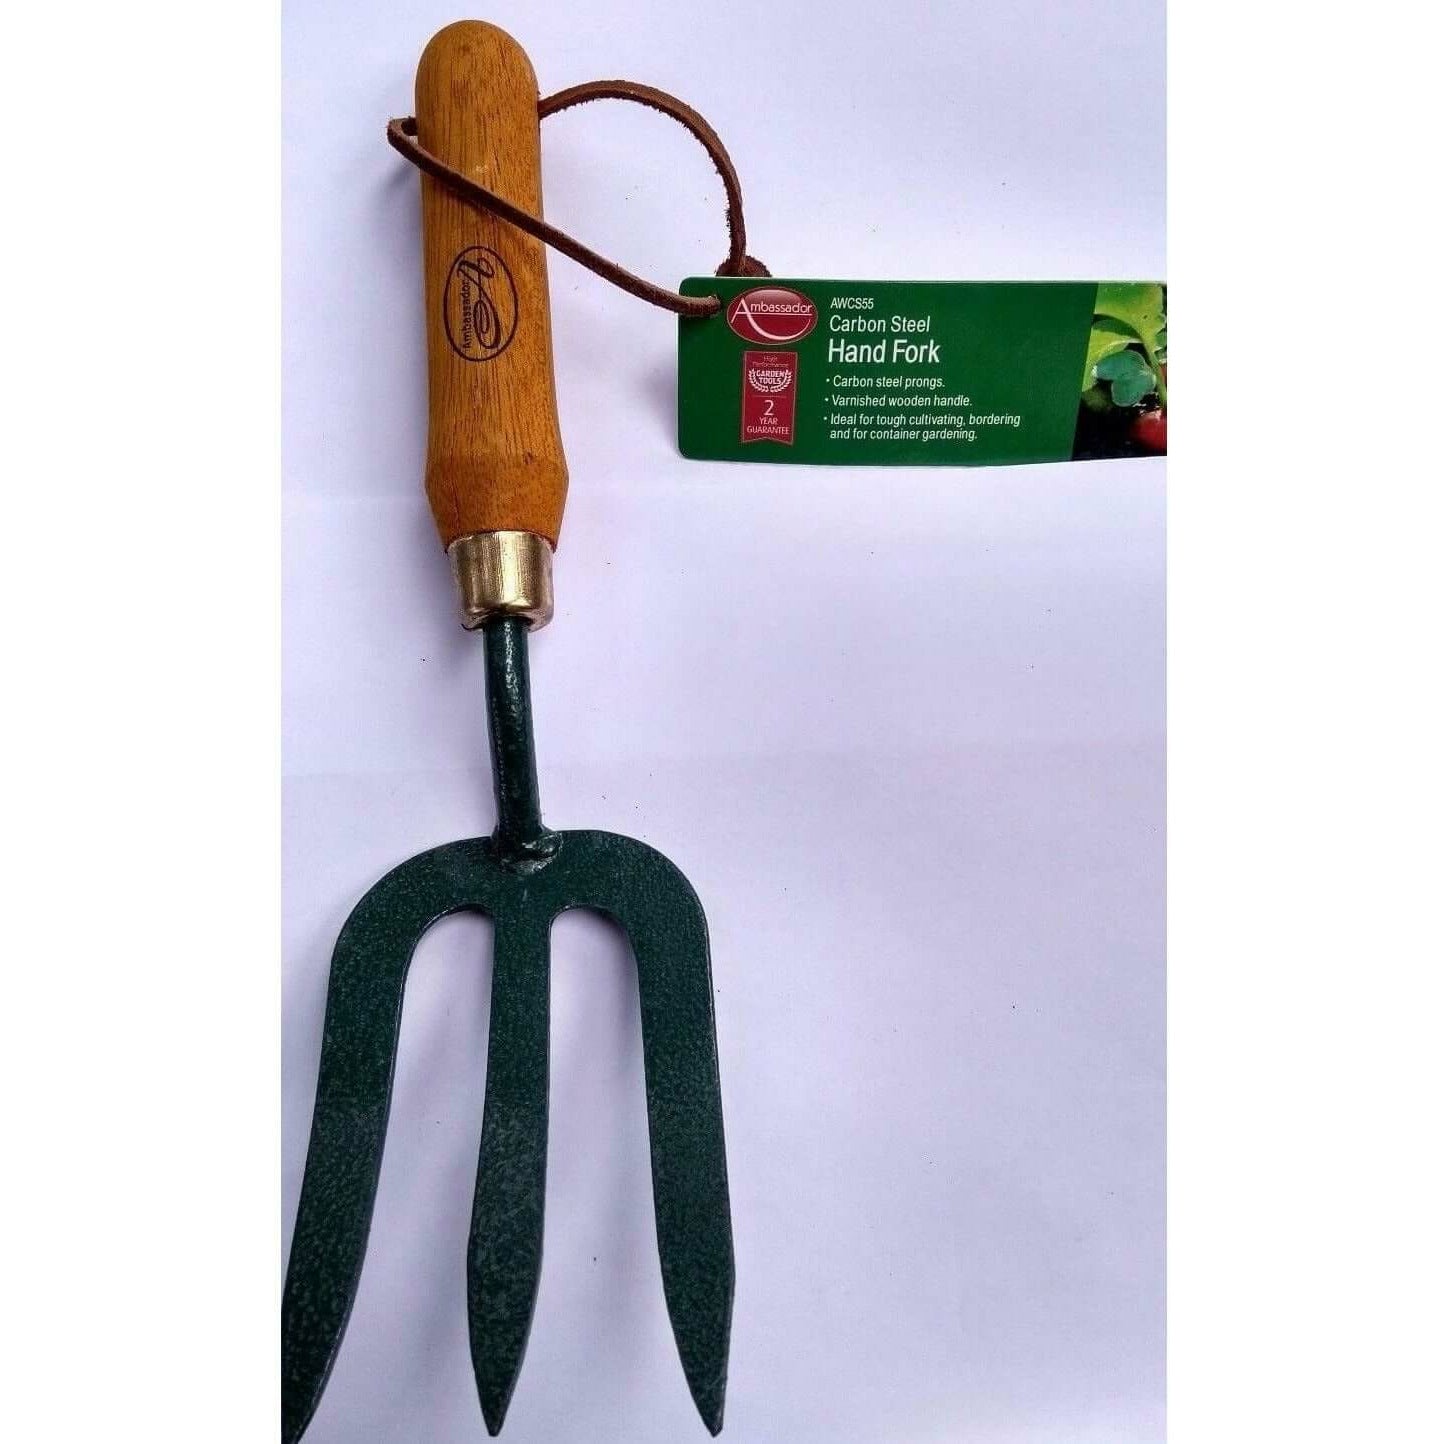 Garden Hand Fork, varnished wooden handle, strong construction  from Gardening Requisites 5.95